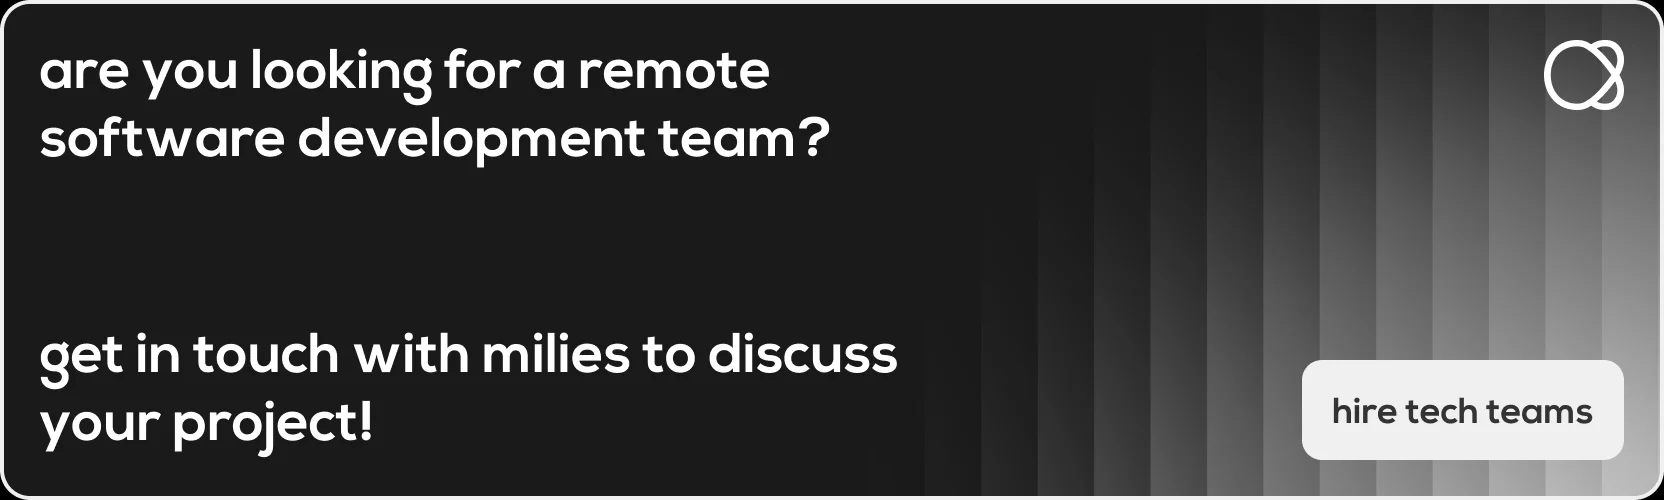 Looking for remote software development team?